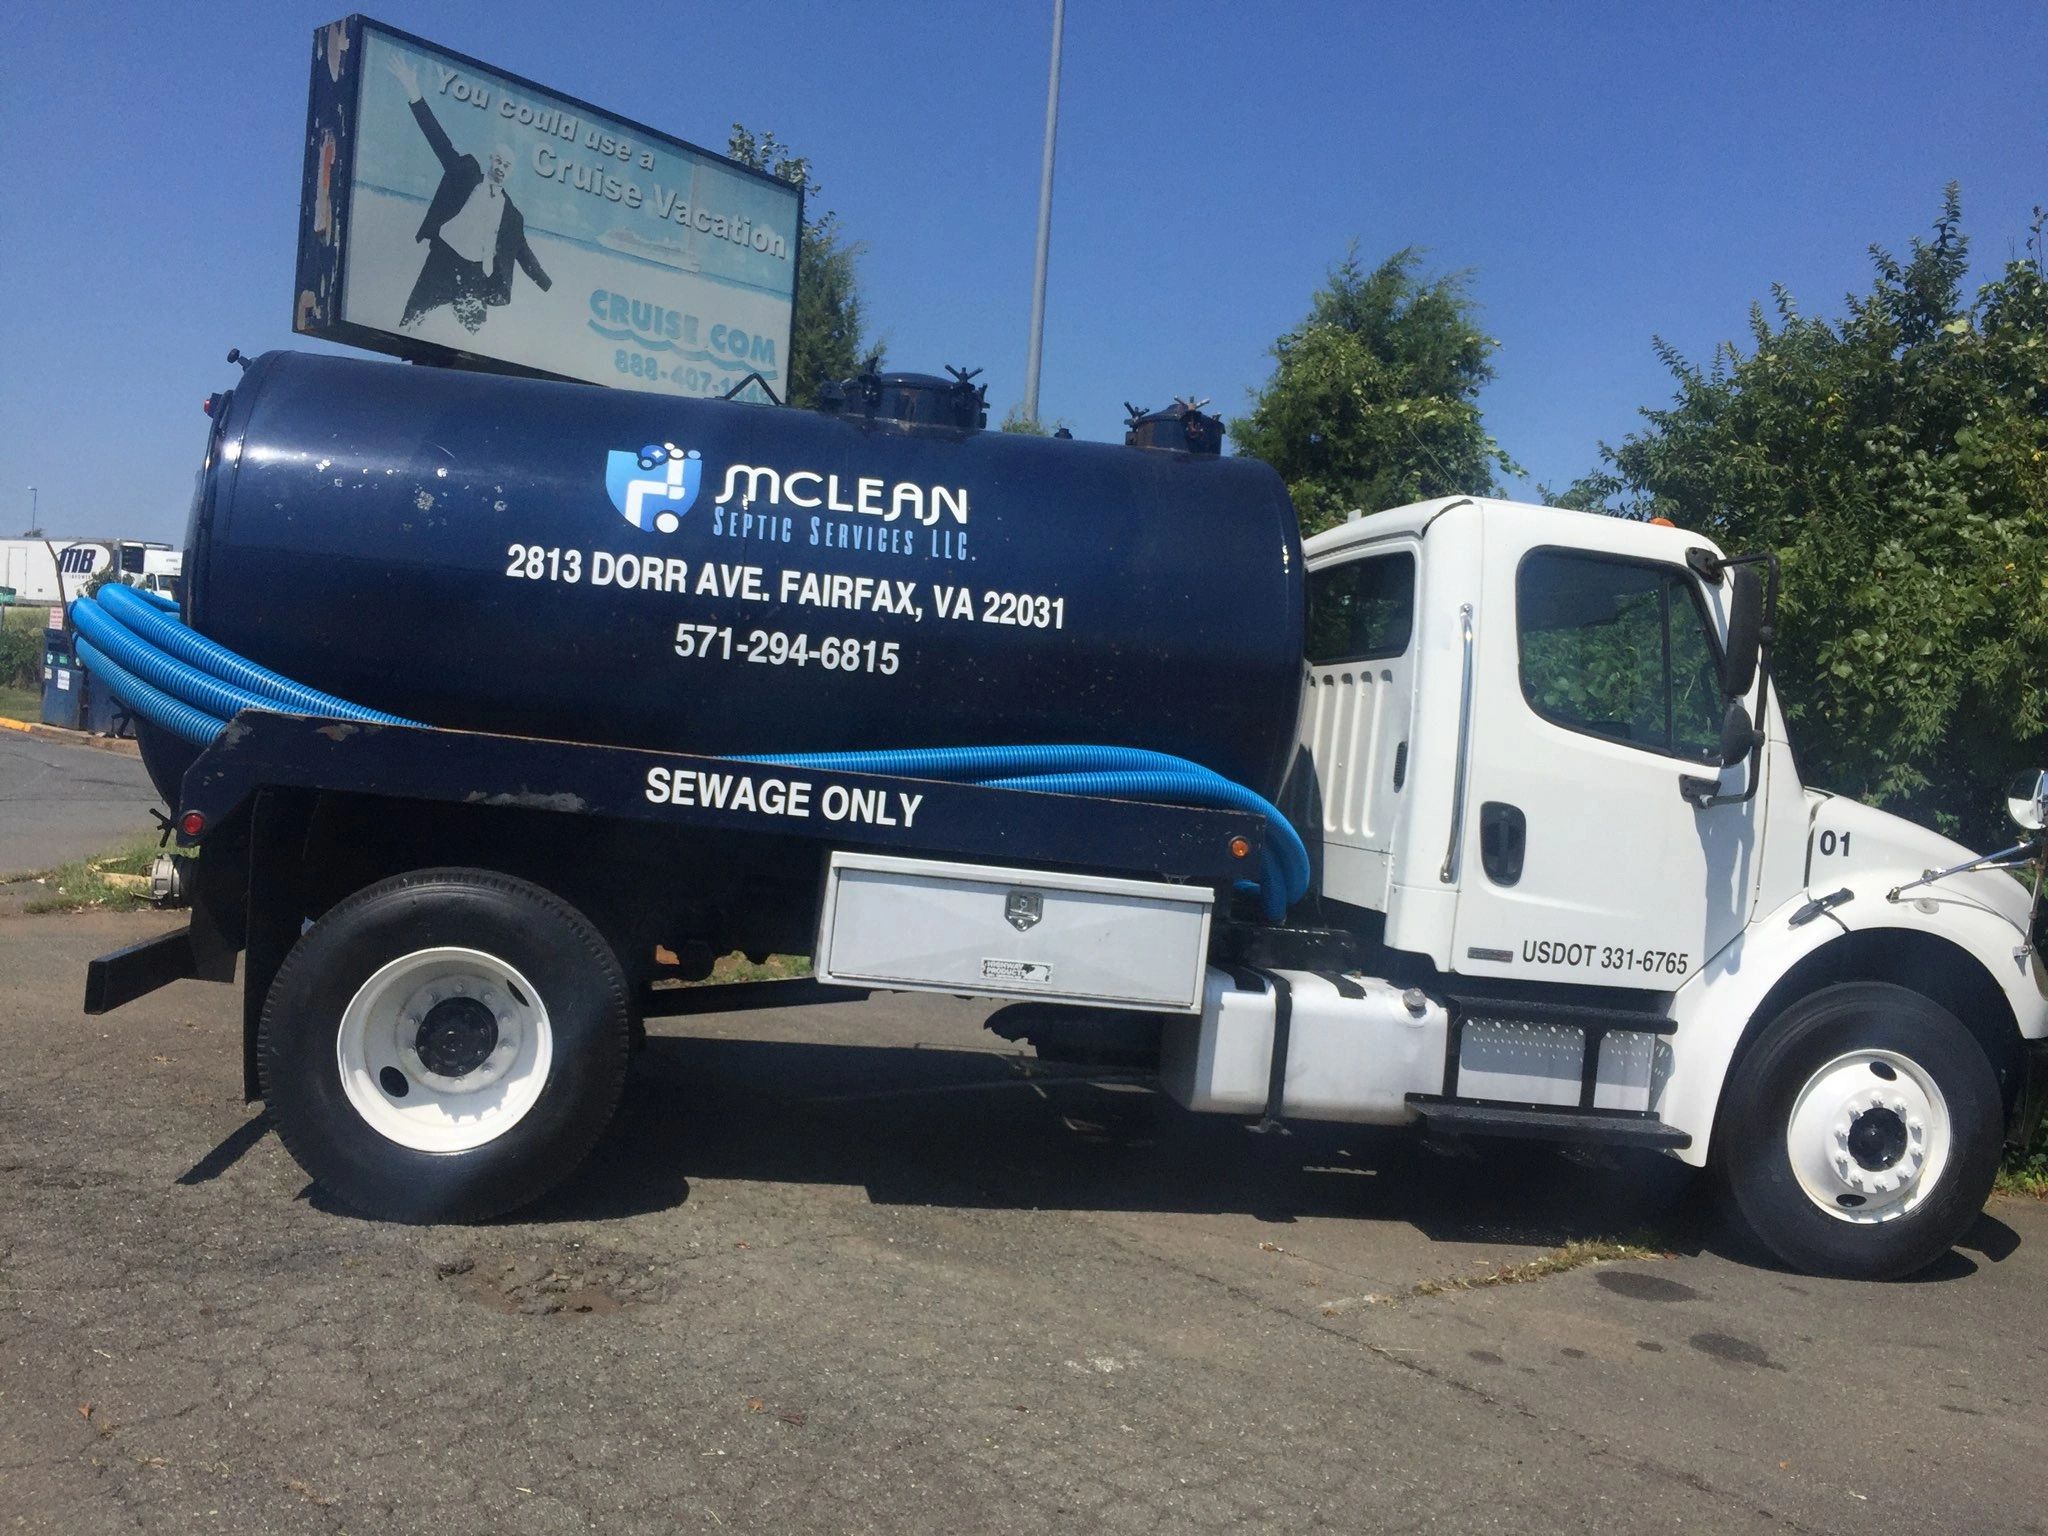 Septic Services.Cleaning and Pumping - Mclean Septic Services